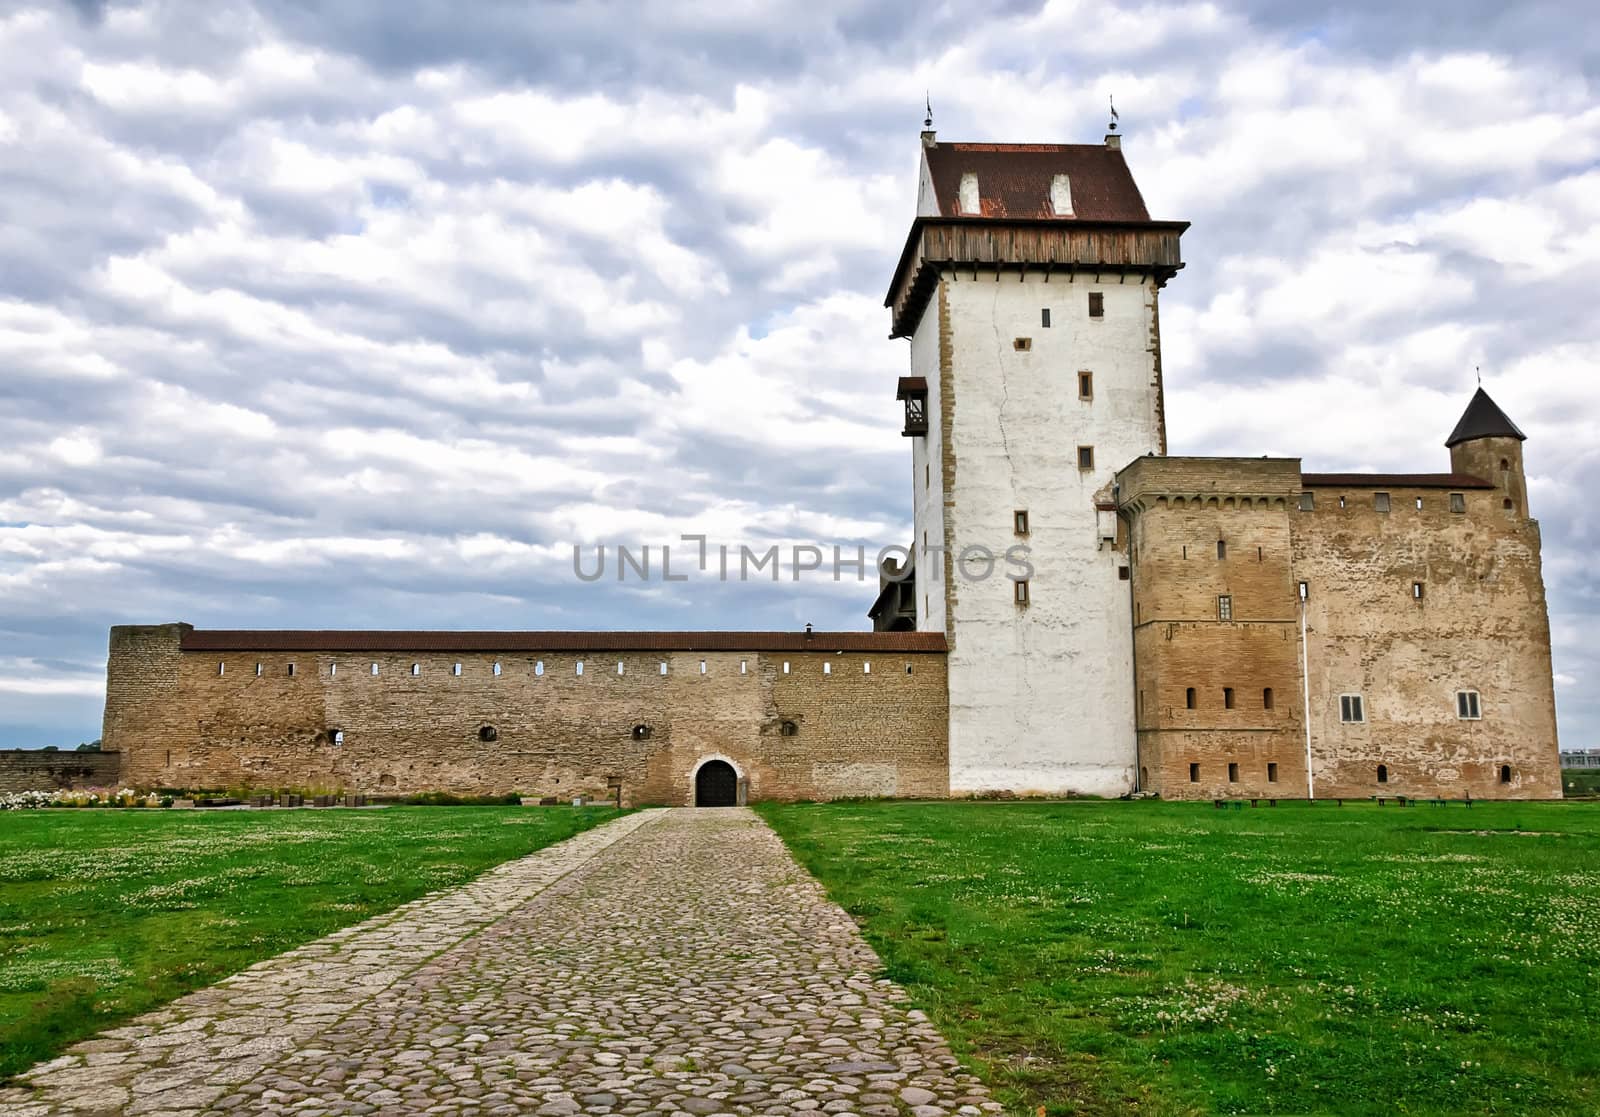 Beautiful medieval castle view (Narva castle) by dmitrimaruta